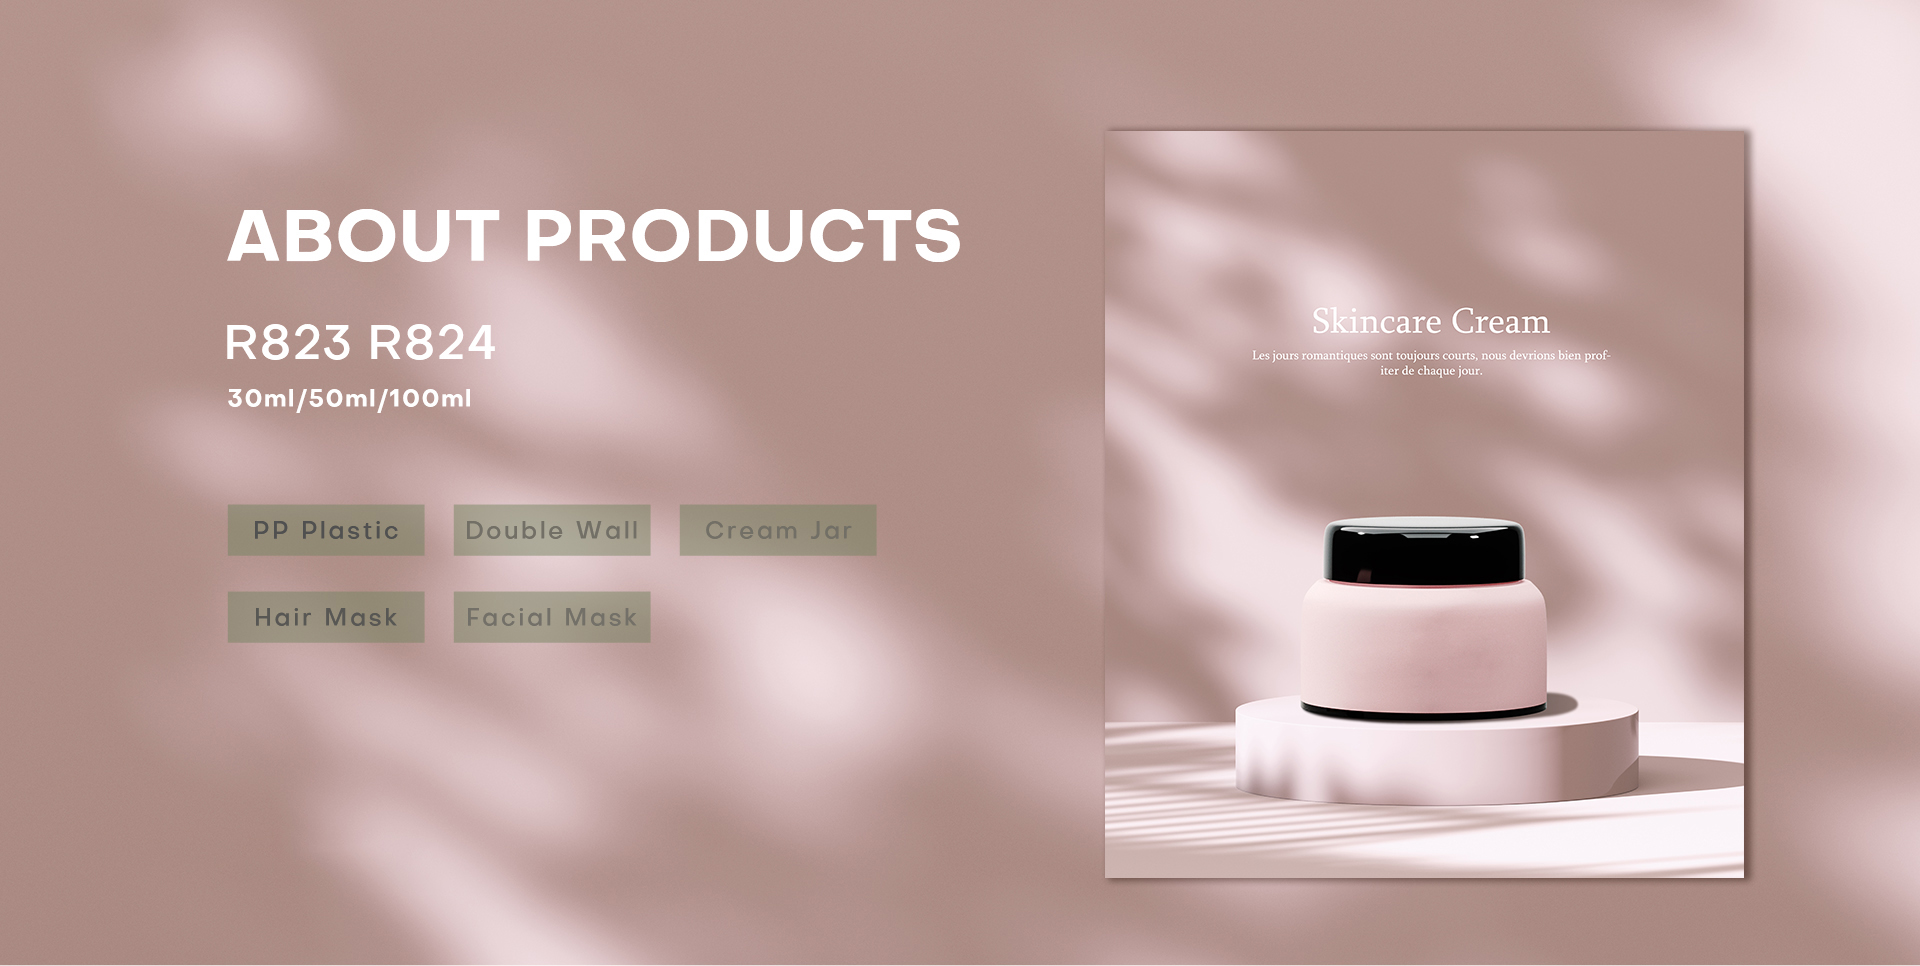 Moving Stock Packaging Forward With Eco-Friendly & Elevated Materials | Beauty Packaging